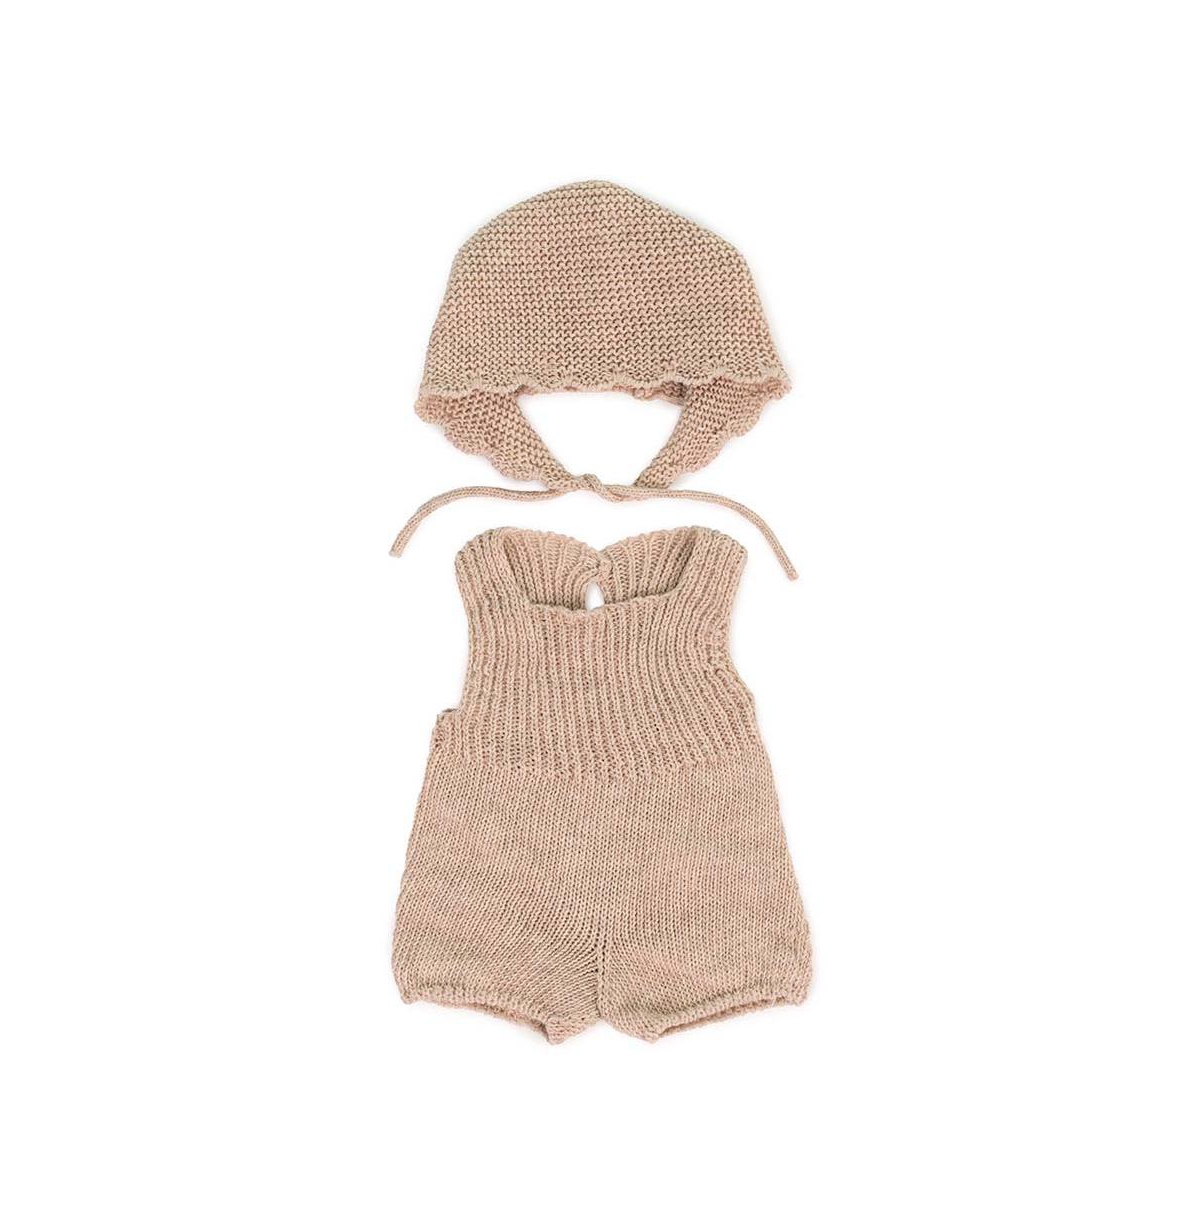 Miniland Kids' Knitted Doll Outfit 15" In Beige